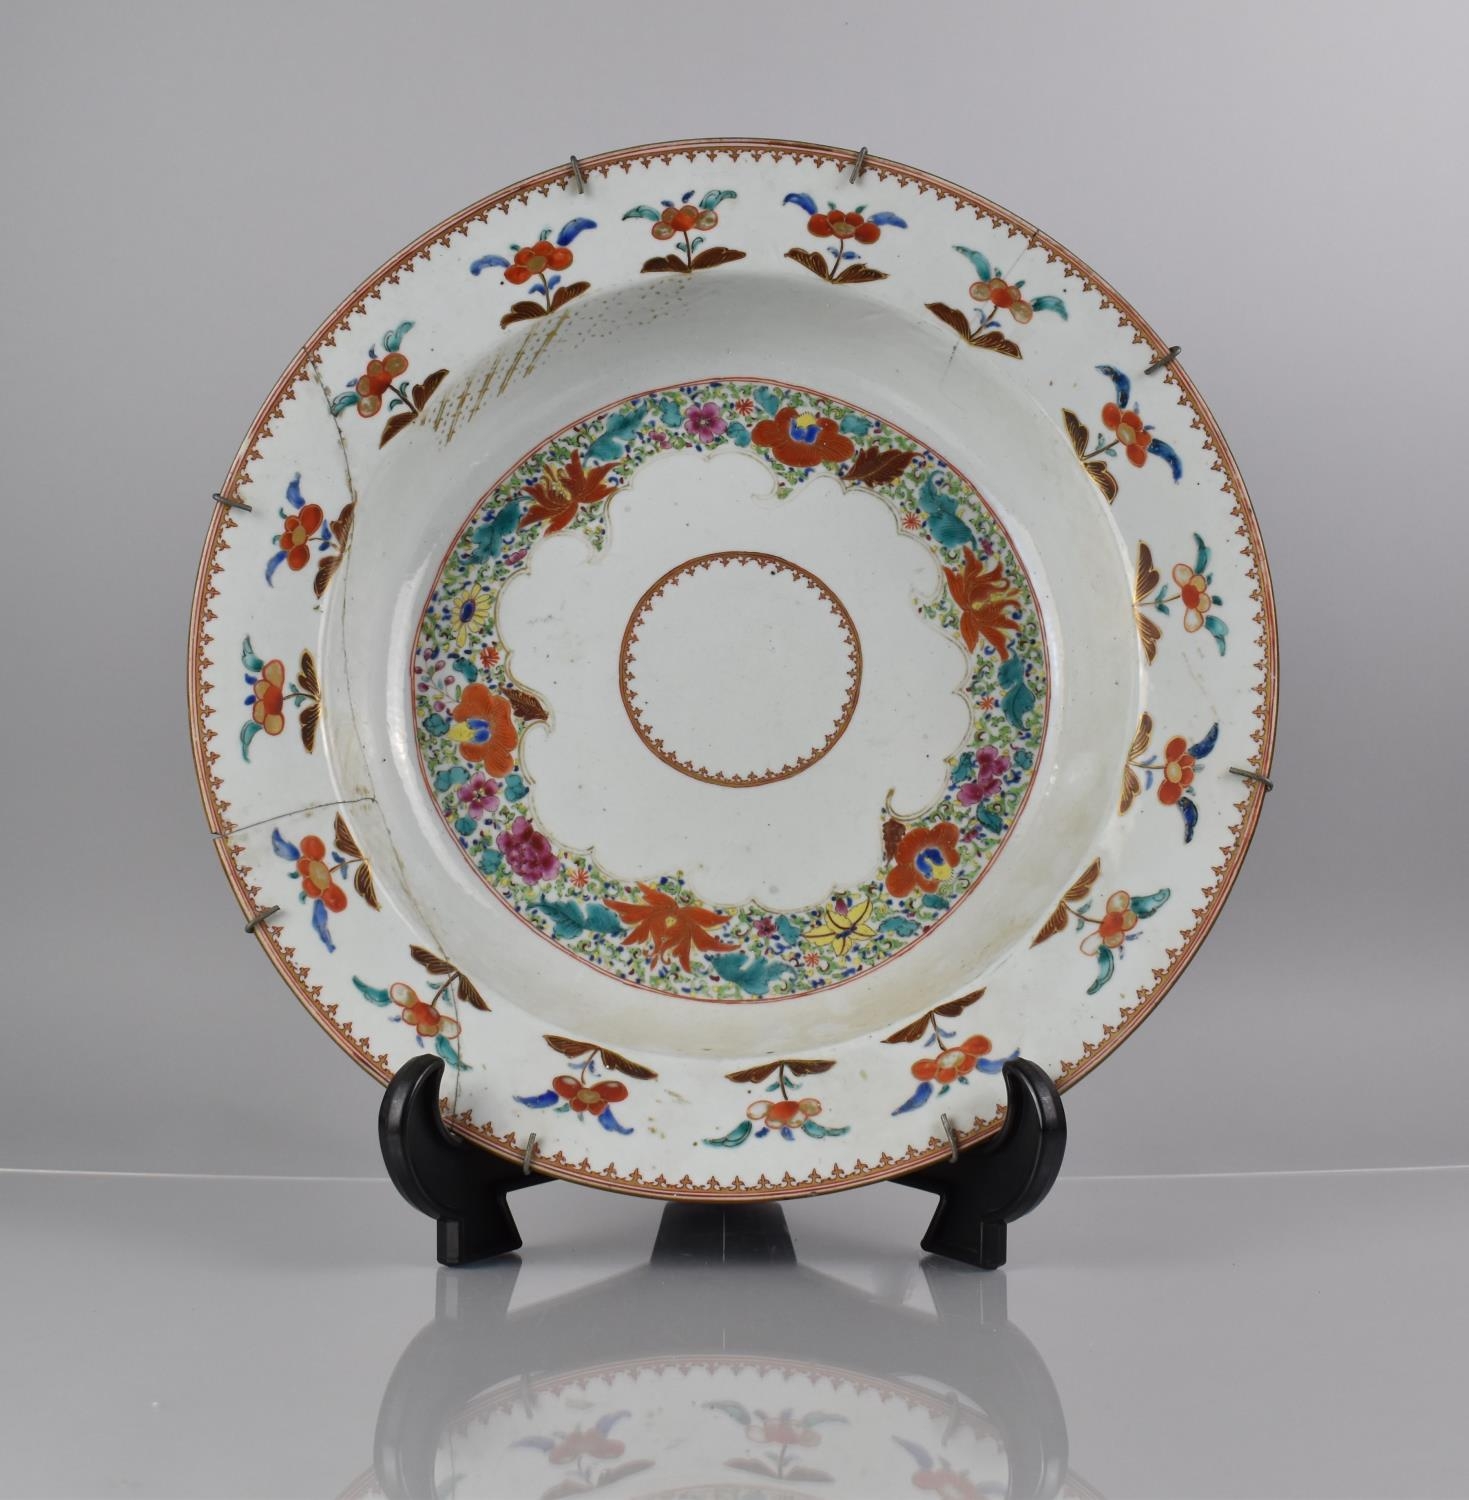 A Large 18th Century Chinese Export Porcelain Shallow Bowl decorated in the Famille Rose Palette